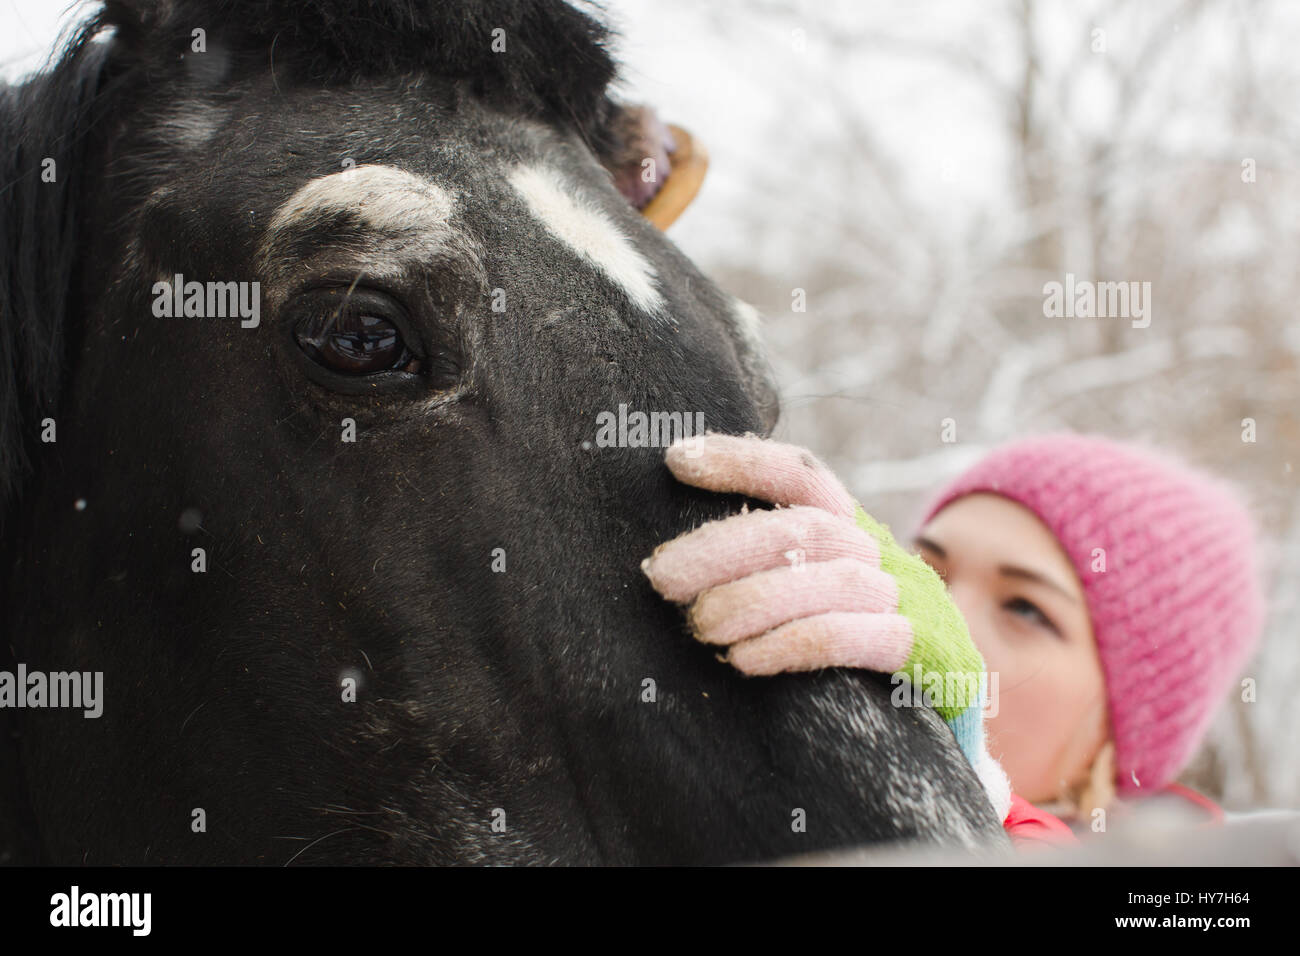 Woman cleaning the horse neb Stock Photo